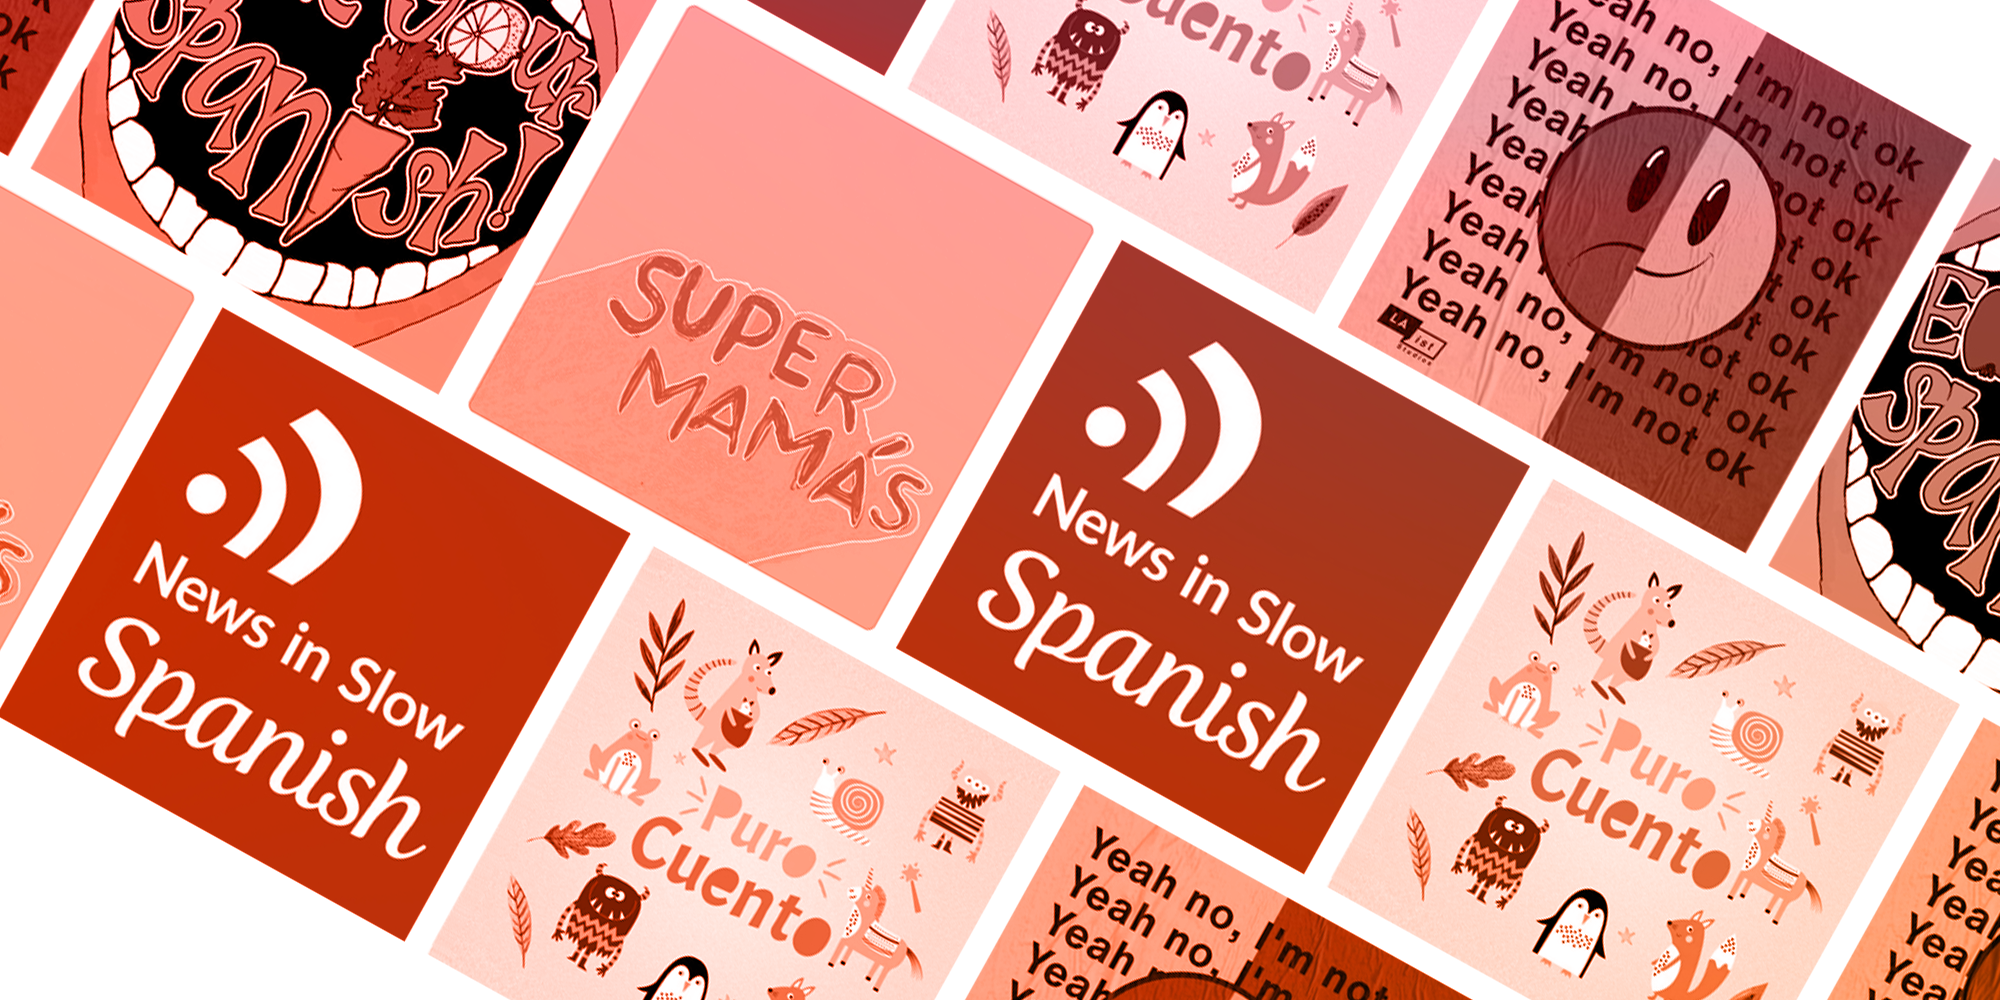 exciting spanish and latinx podcasts